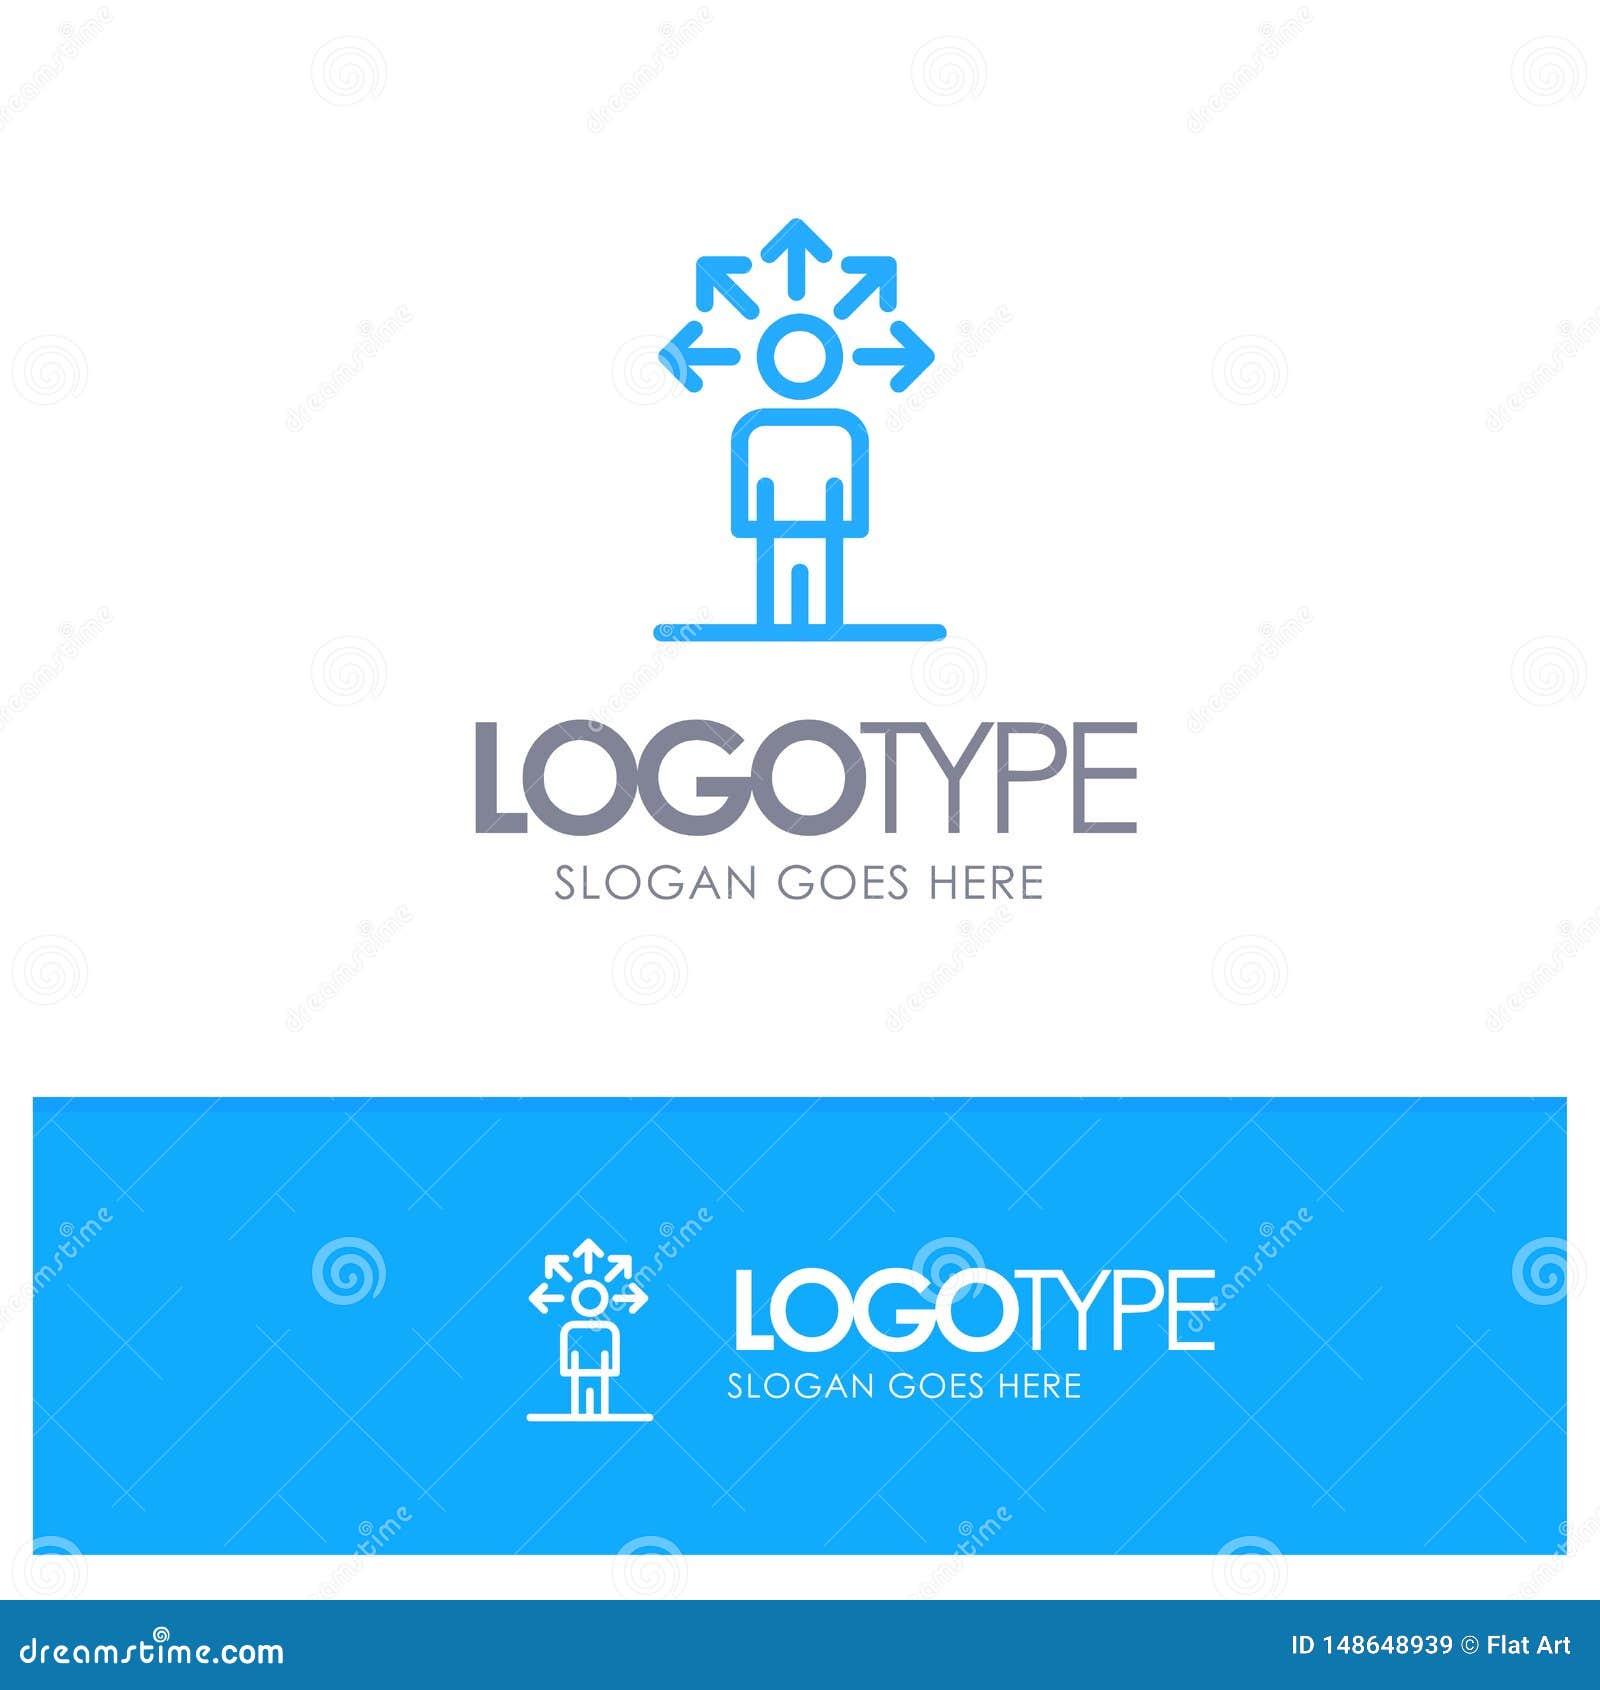 communication, abilities, connection, human blue outline logo with place for tagline